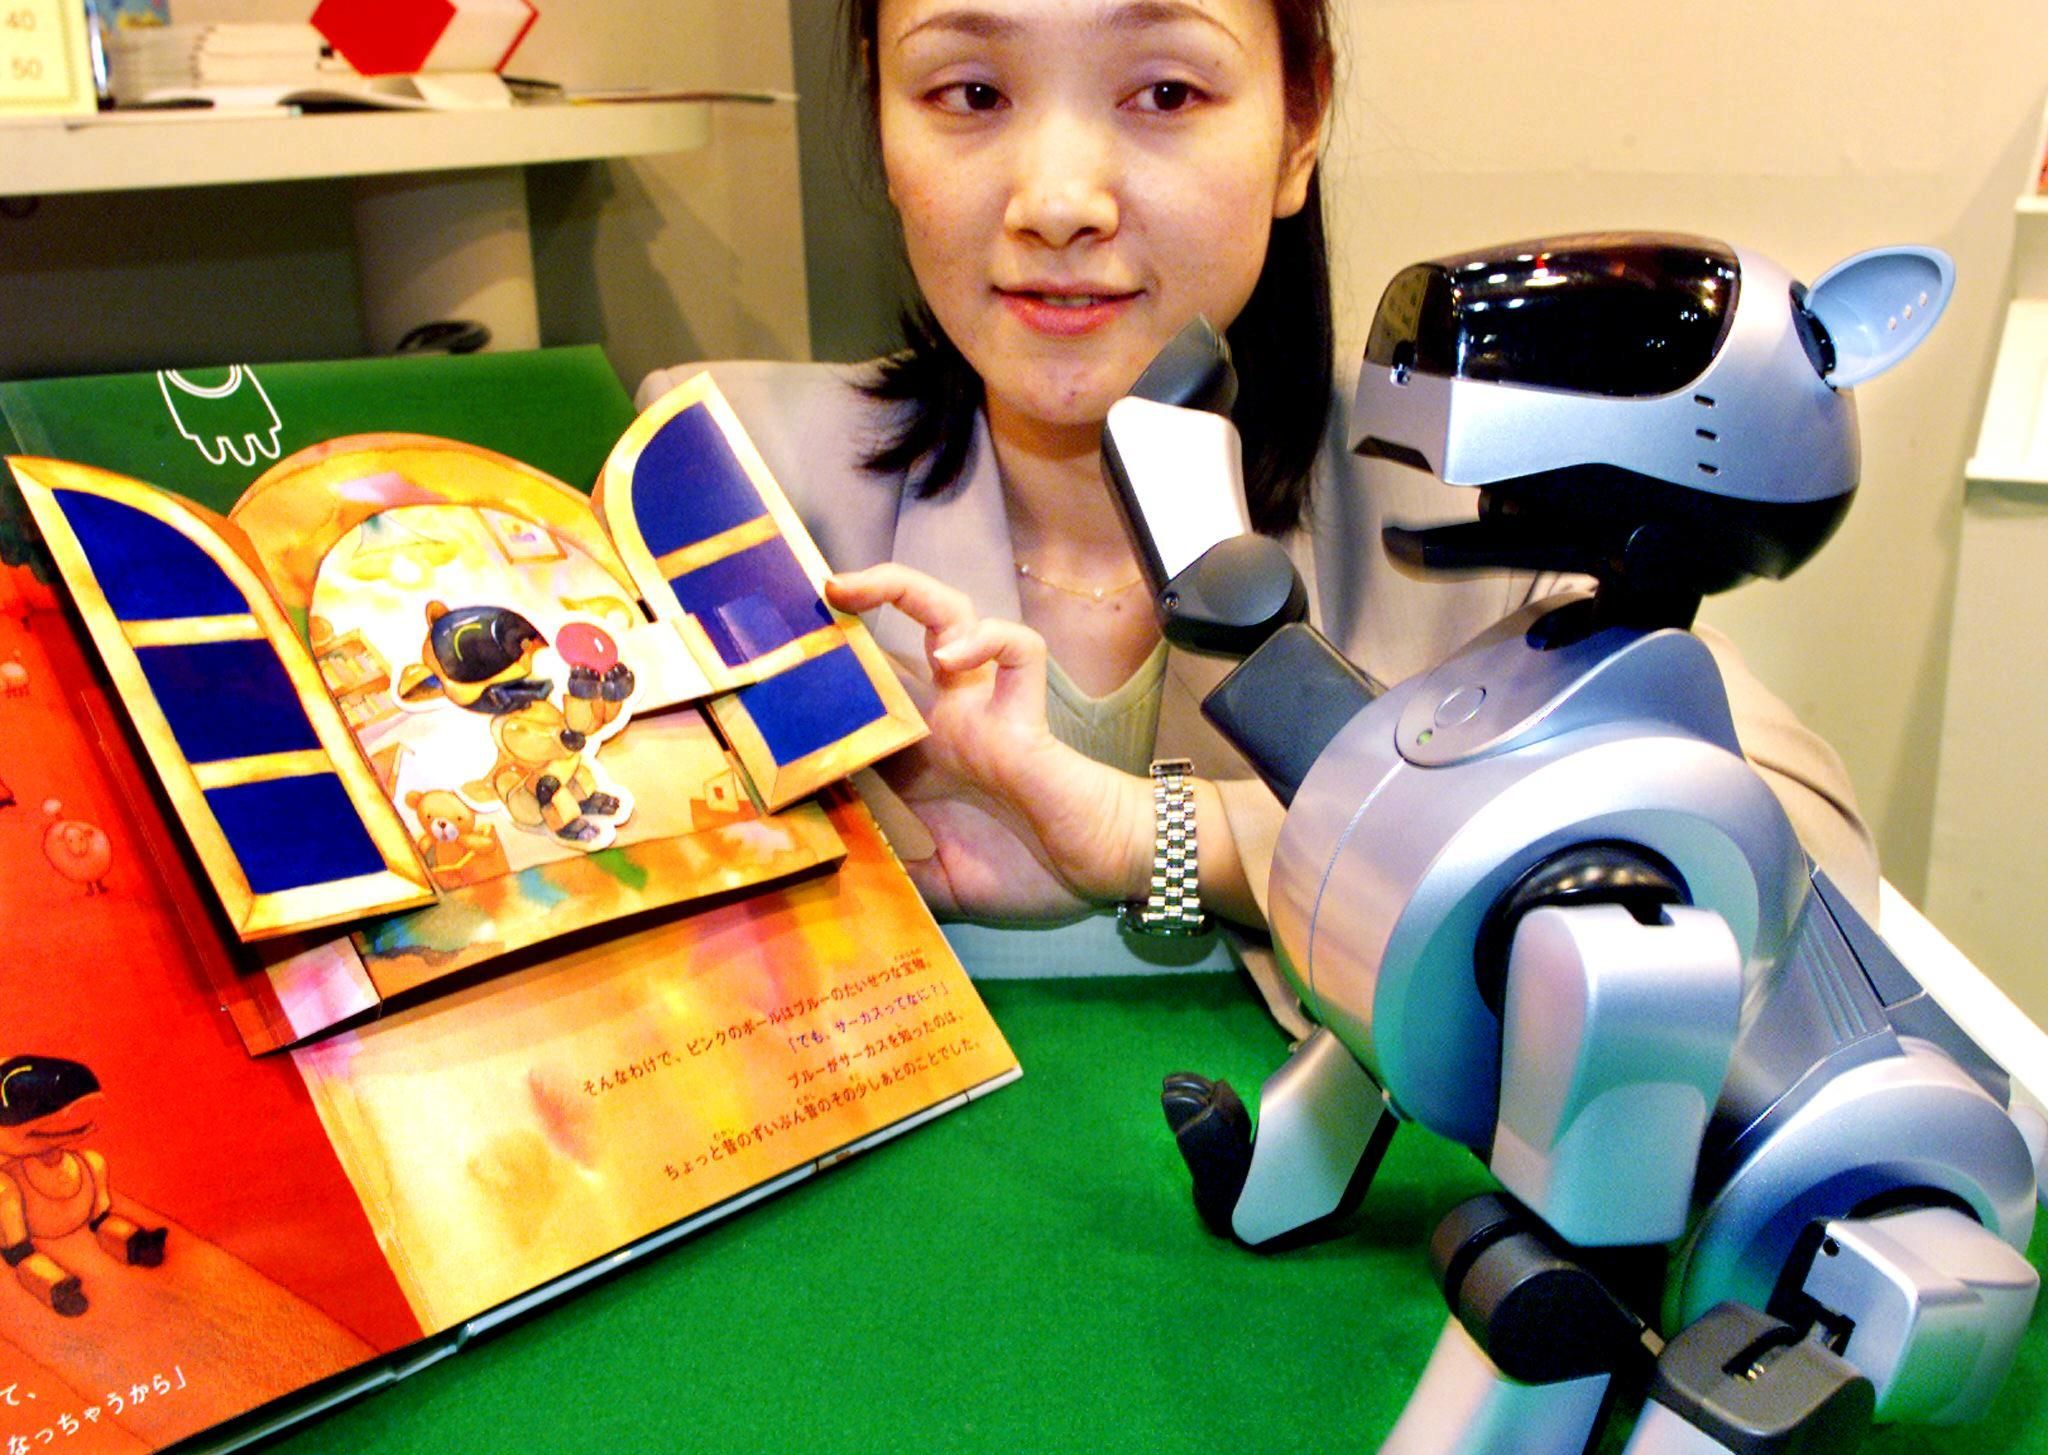 robots read books to learn ethics.